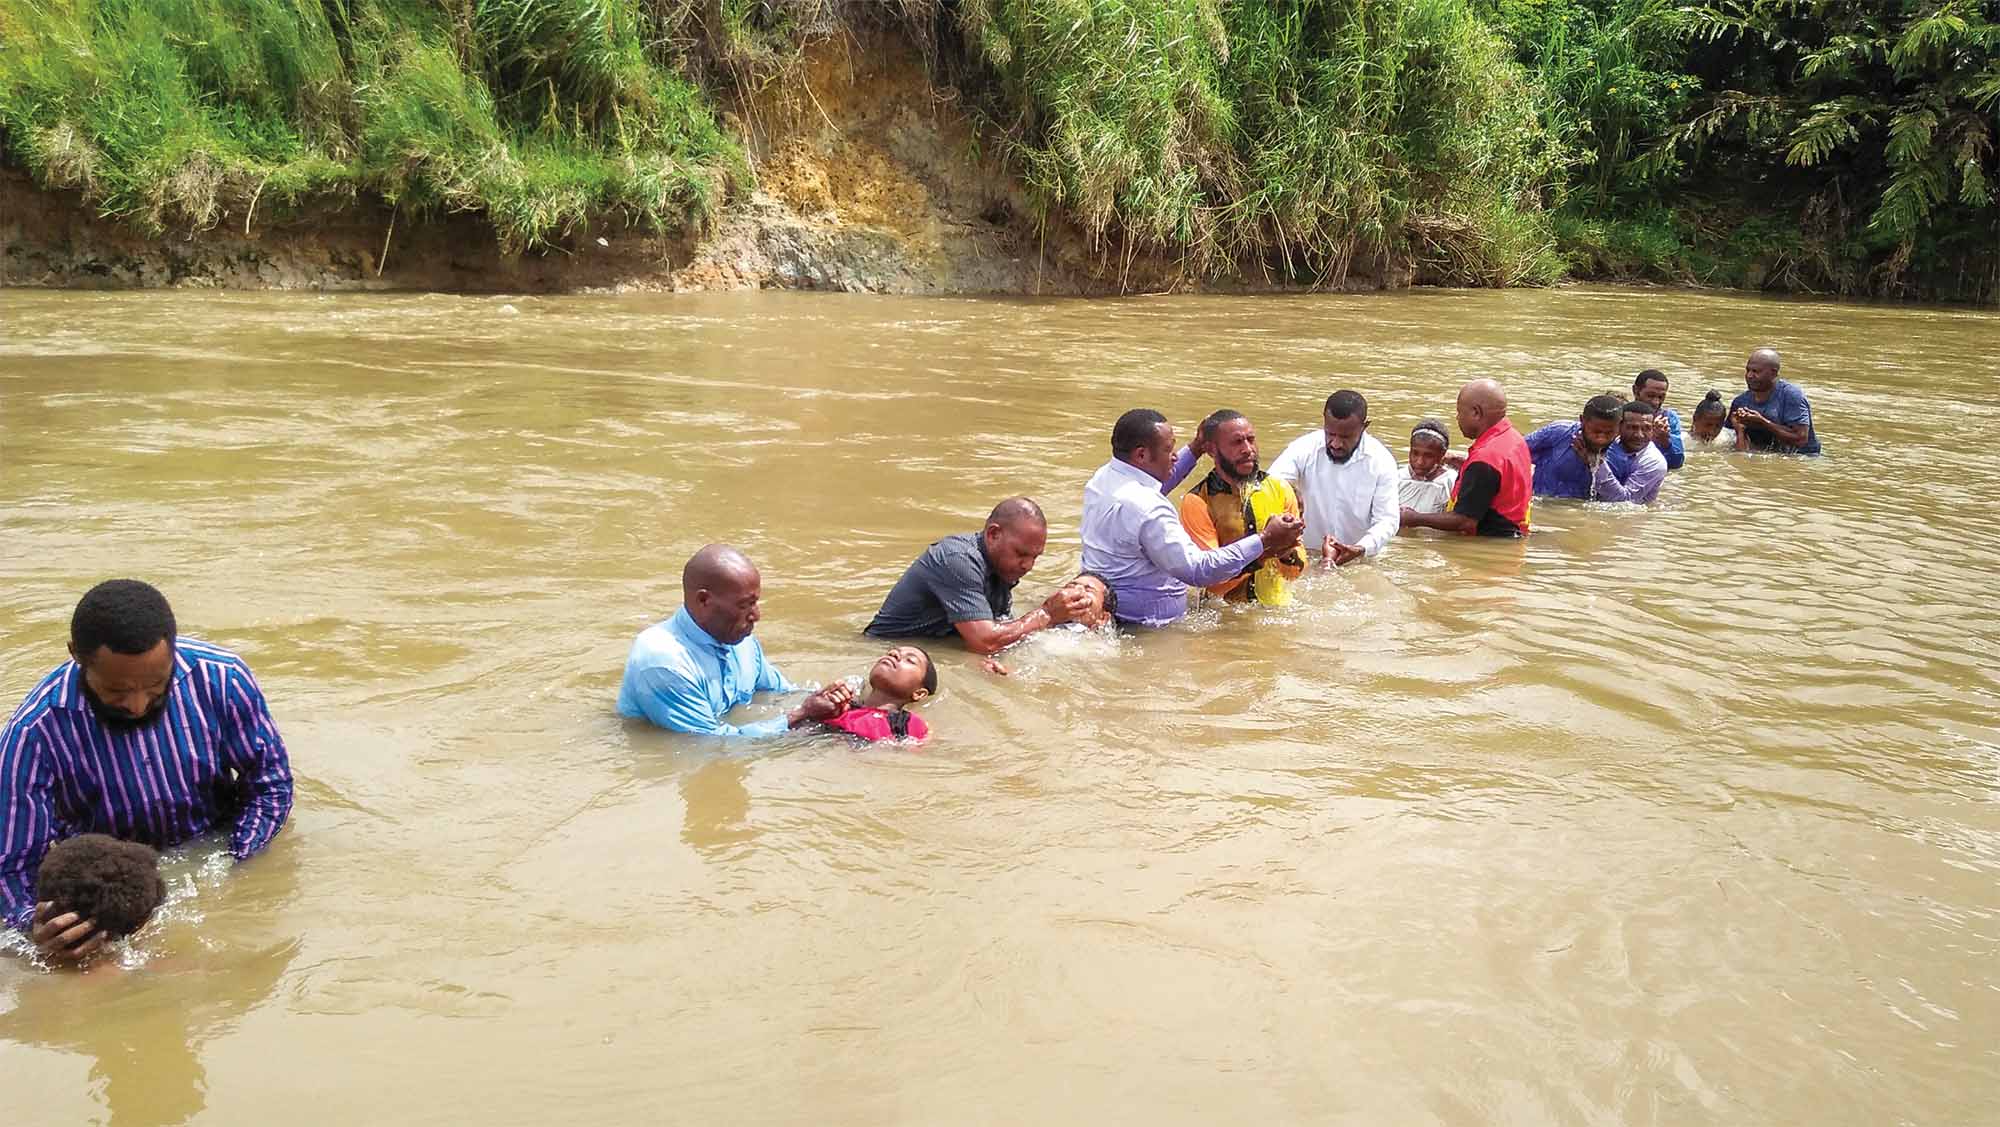 A group of Christians are baptized in a river in Papua New Guinea.